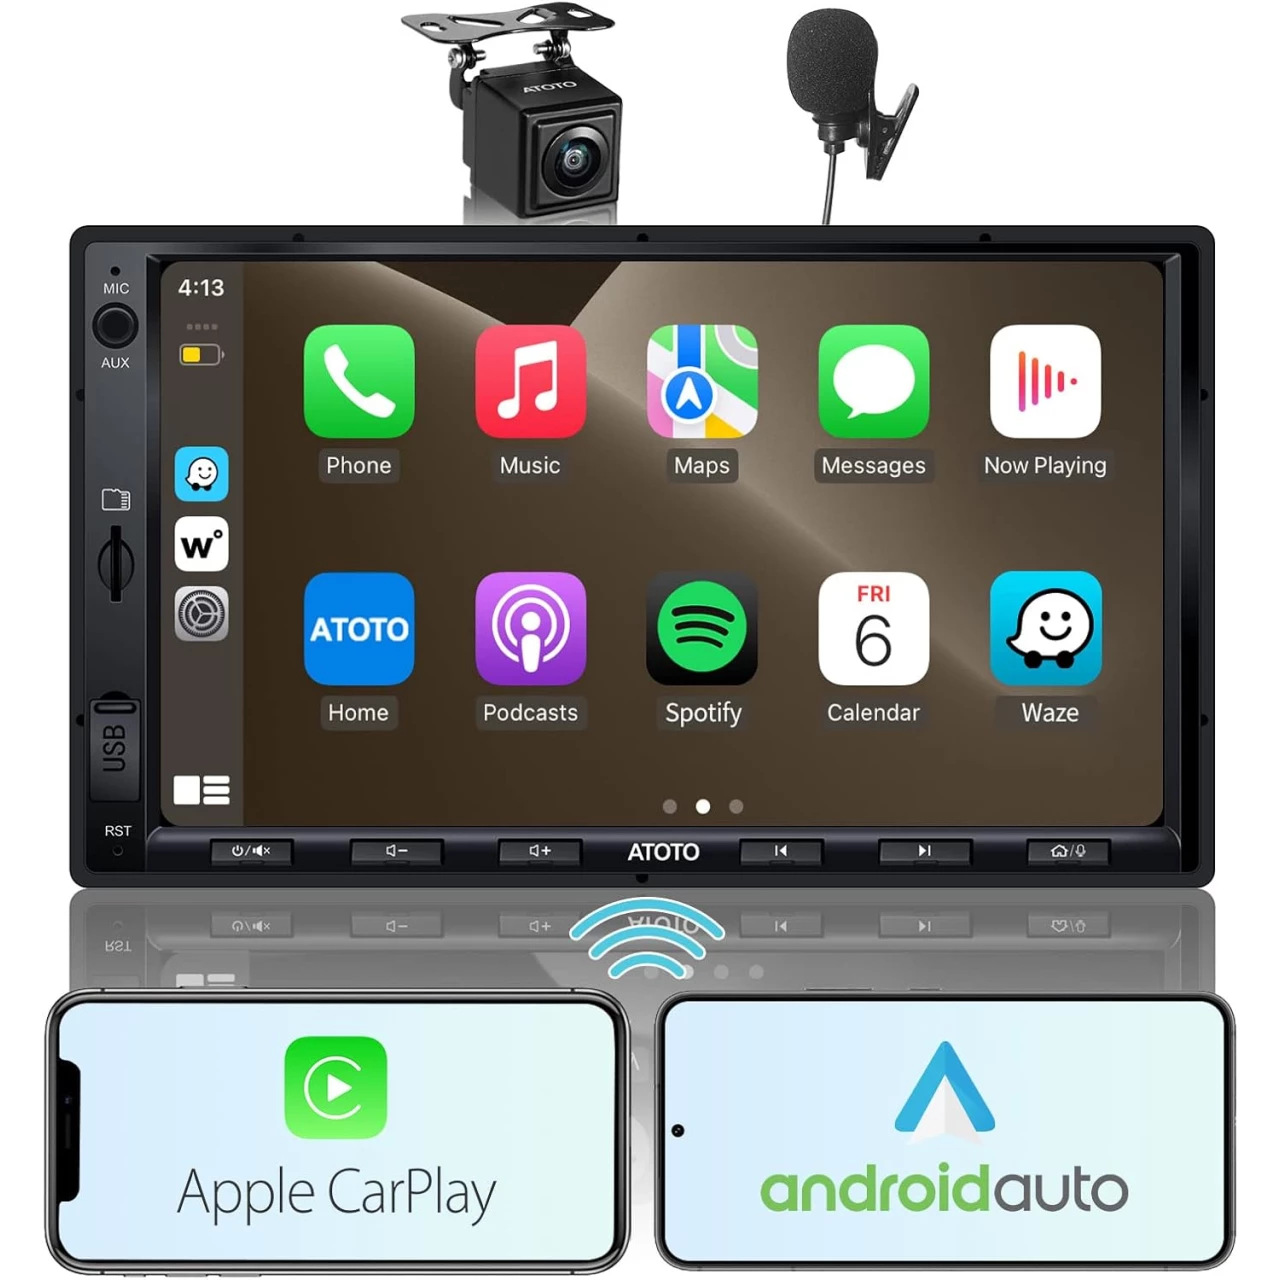 [Upgrade] ATOTO Double Din Car Stereo with Wireless CarPlay,Wireless Android Auto,7in IPS Touchscreen,Bluetooth,Phone Mirroring,HD LRV Camera,USB Video &amp; Audio,F7G2A7WE-S01